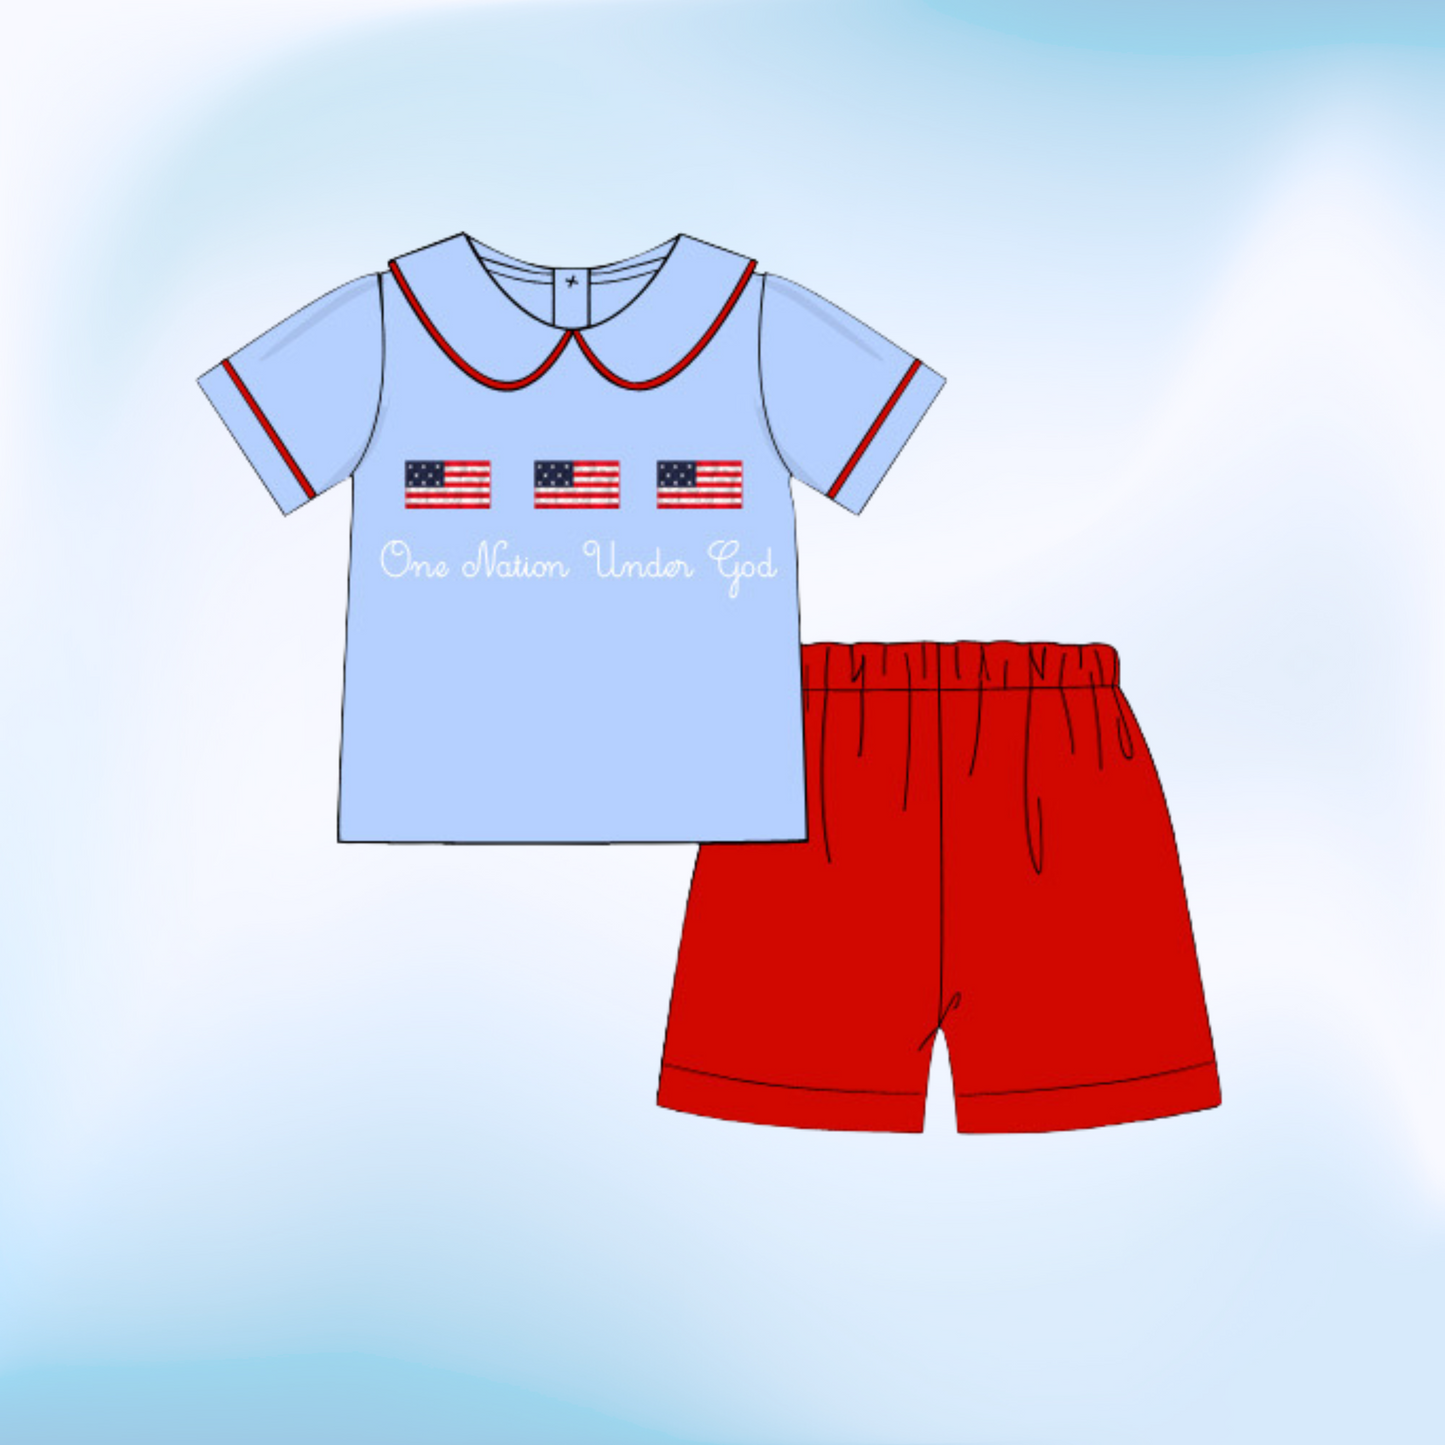 "One Nation Under God" Outfits